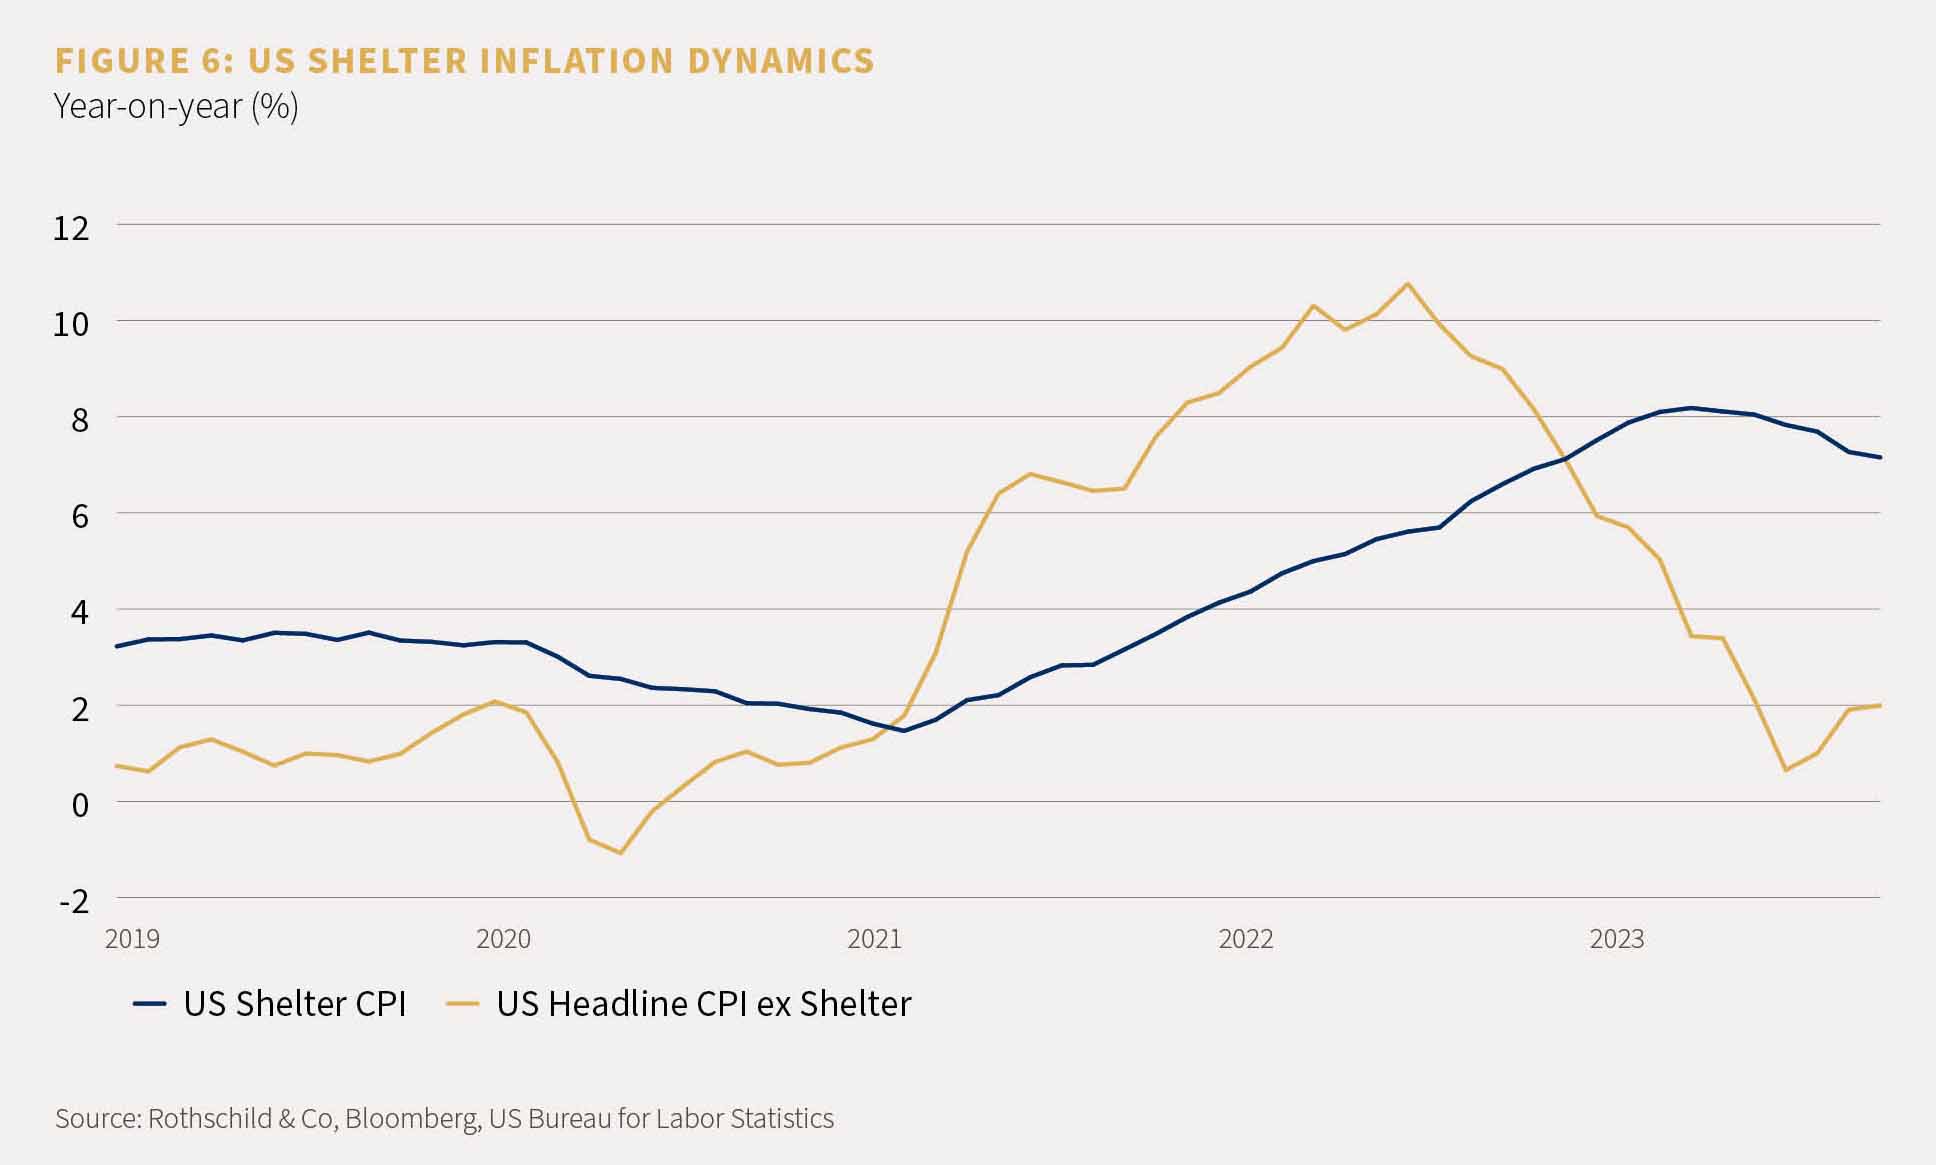 A chart to show US shelter inflation dynamics year-on-year